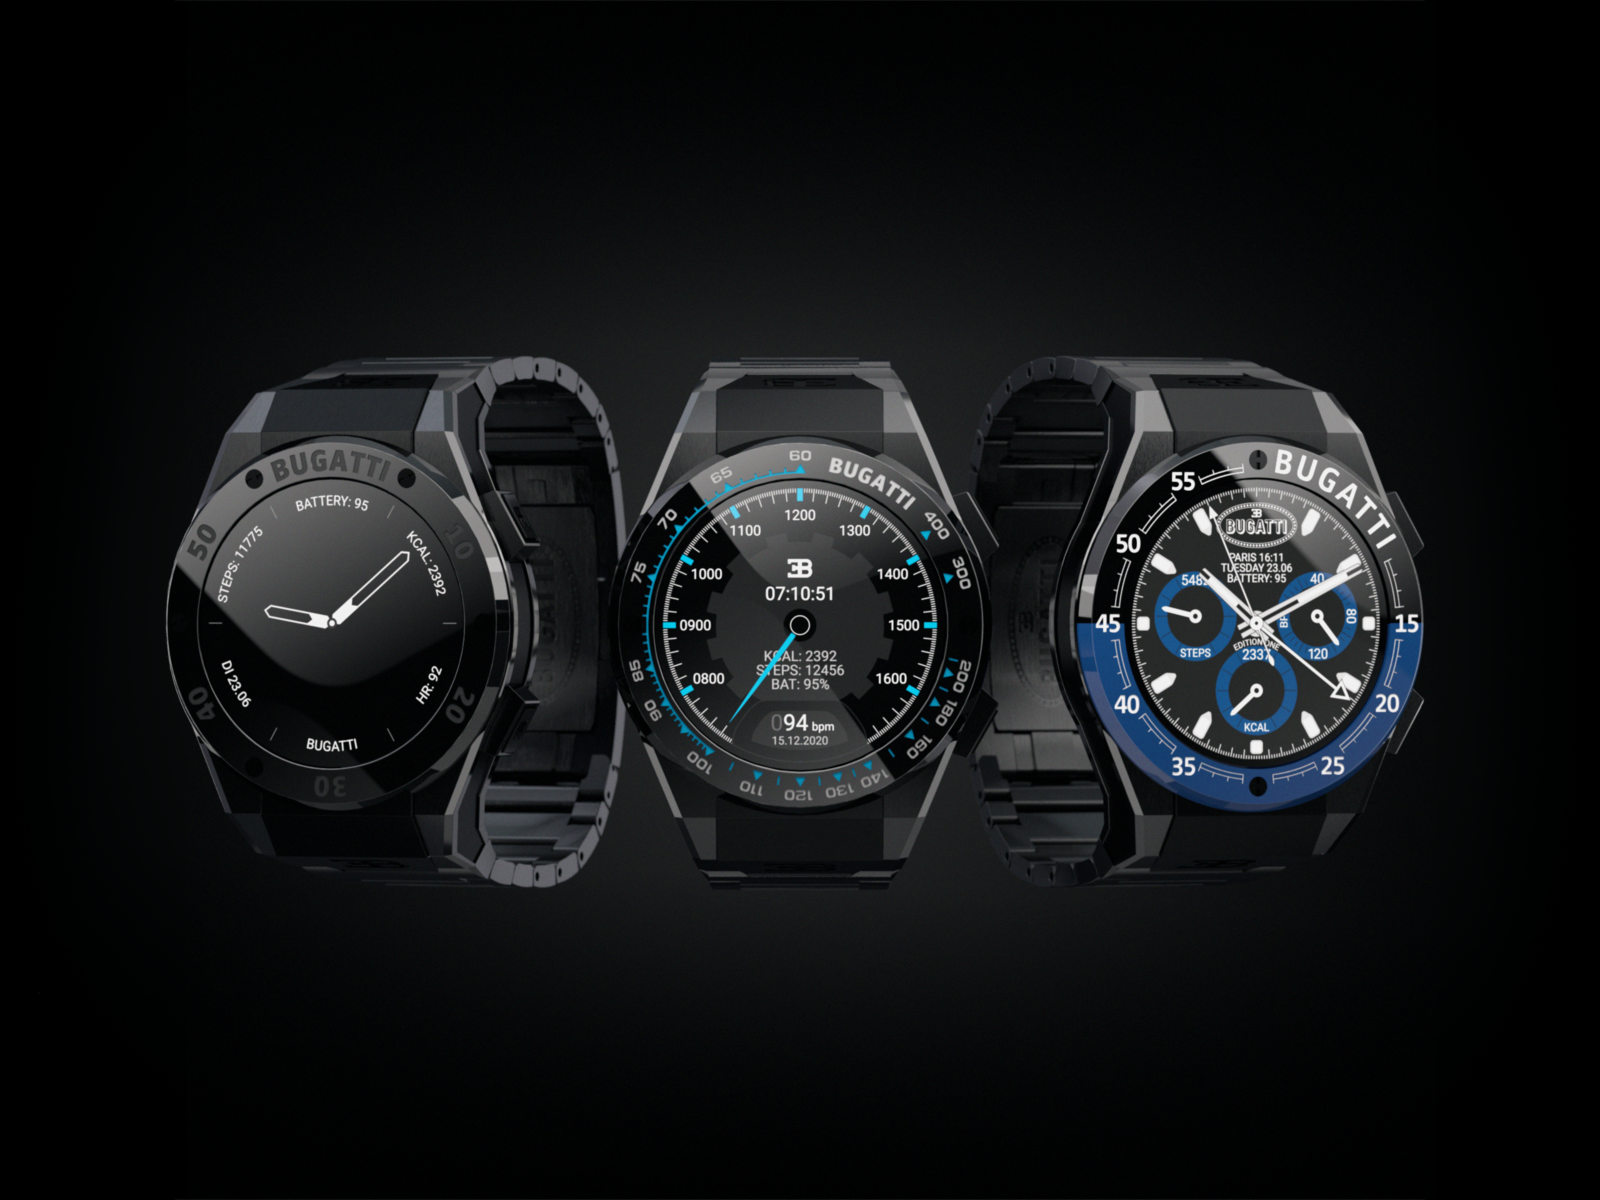 Automaker Bugatti launches three smartwatches with GPS, SpO2, 14 days battery life